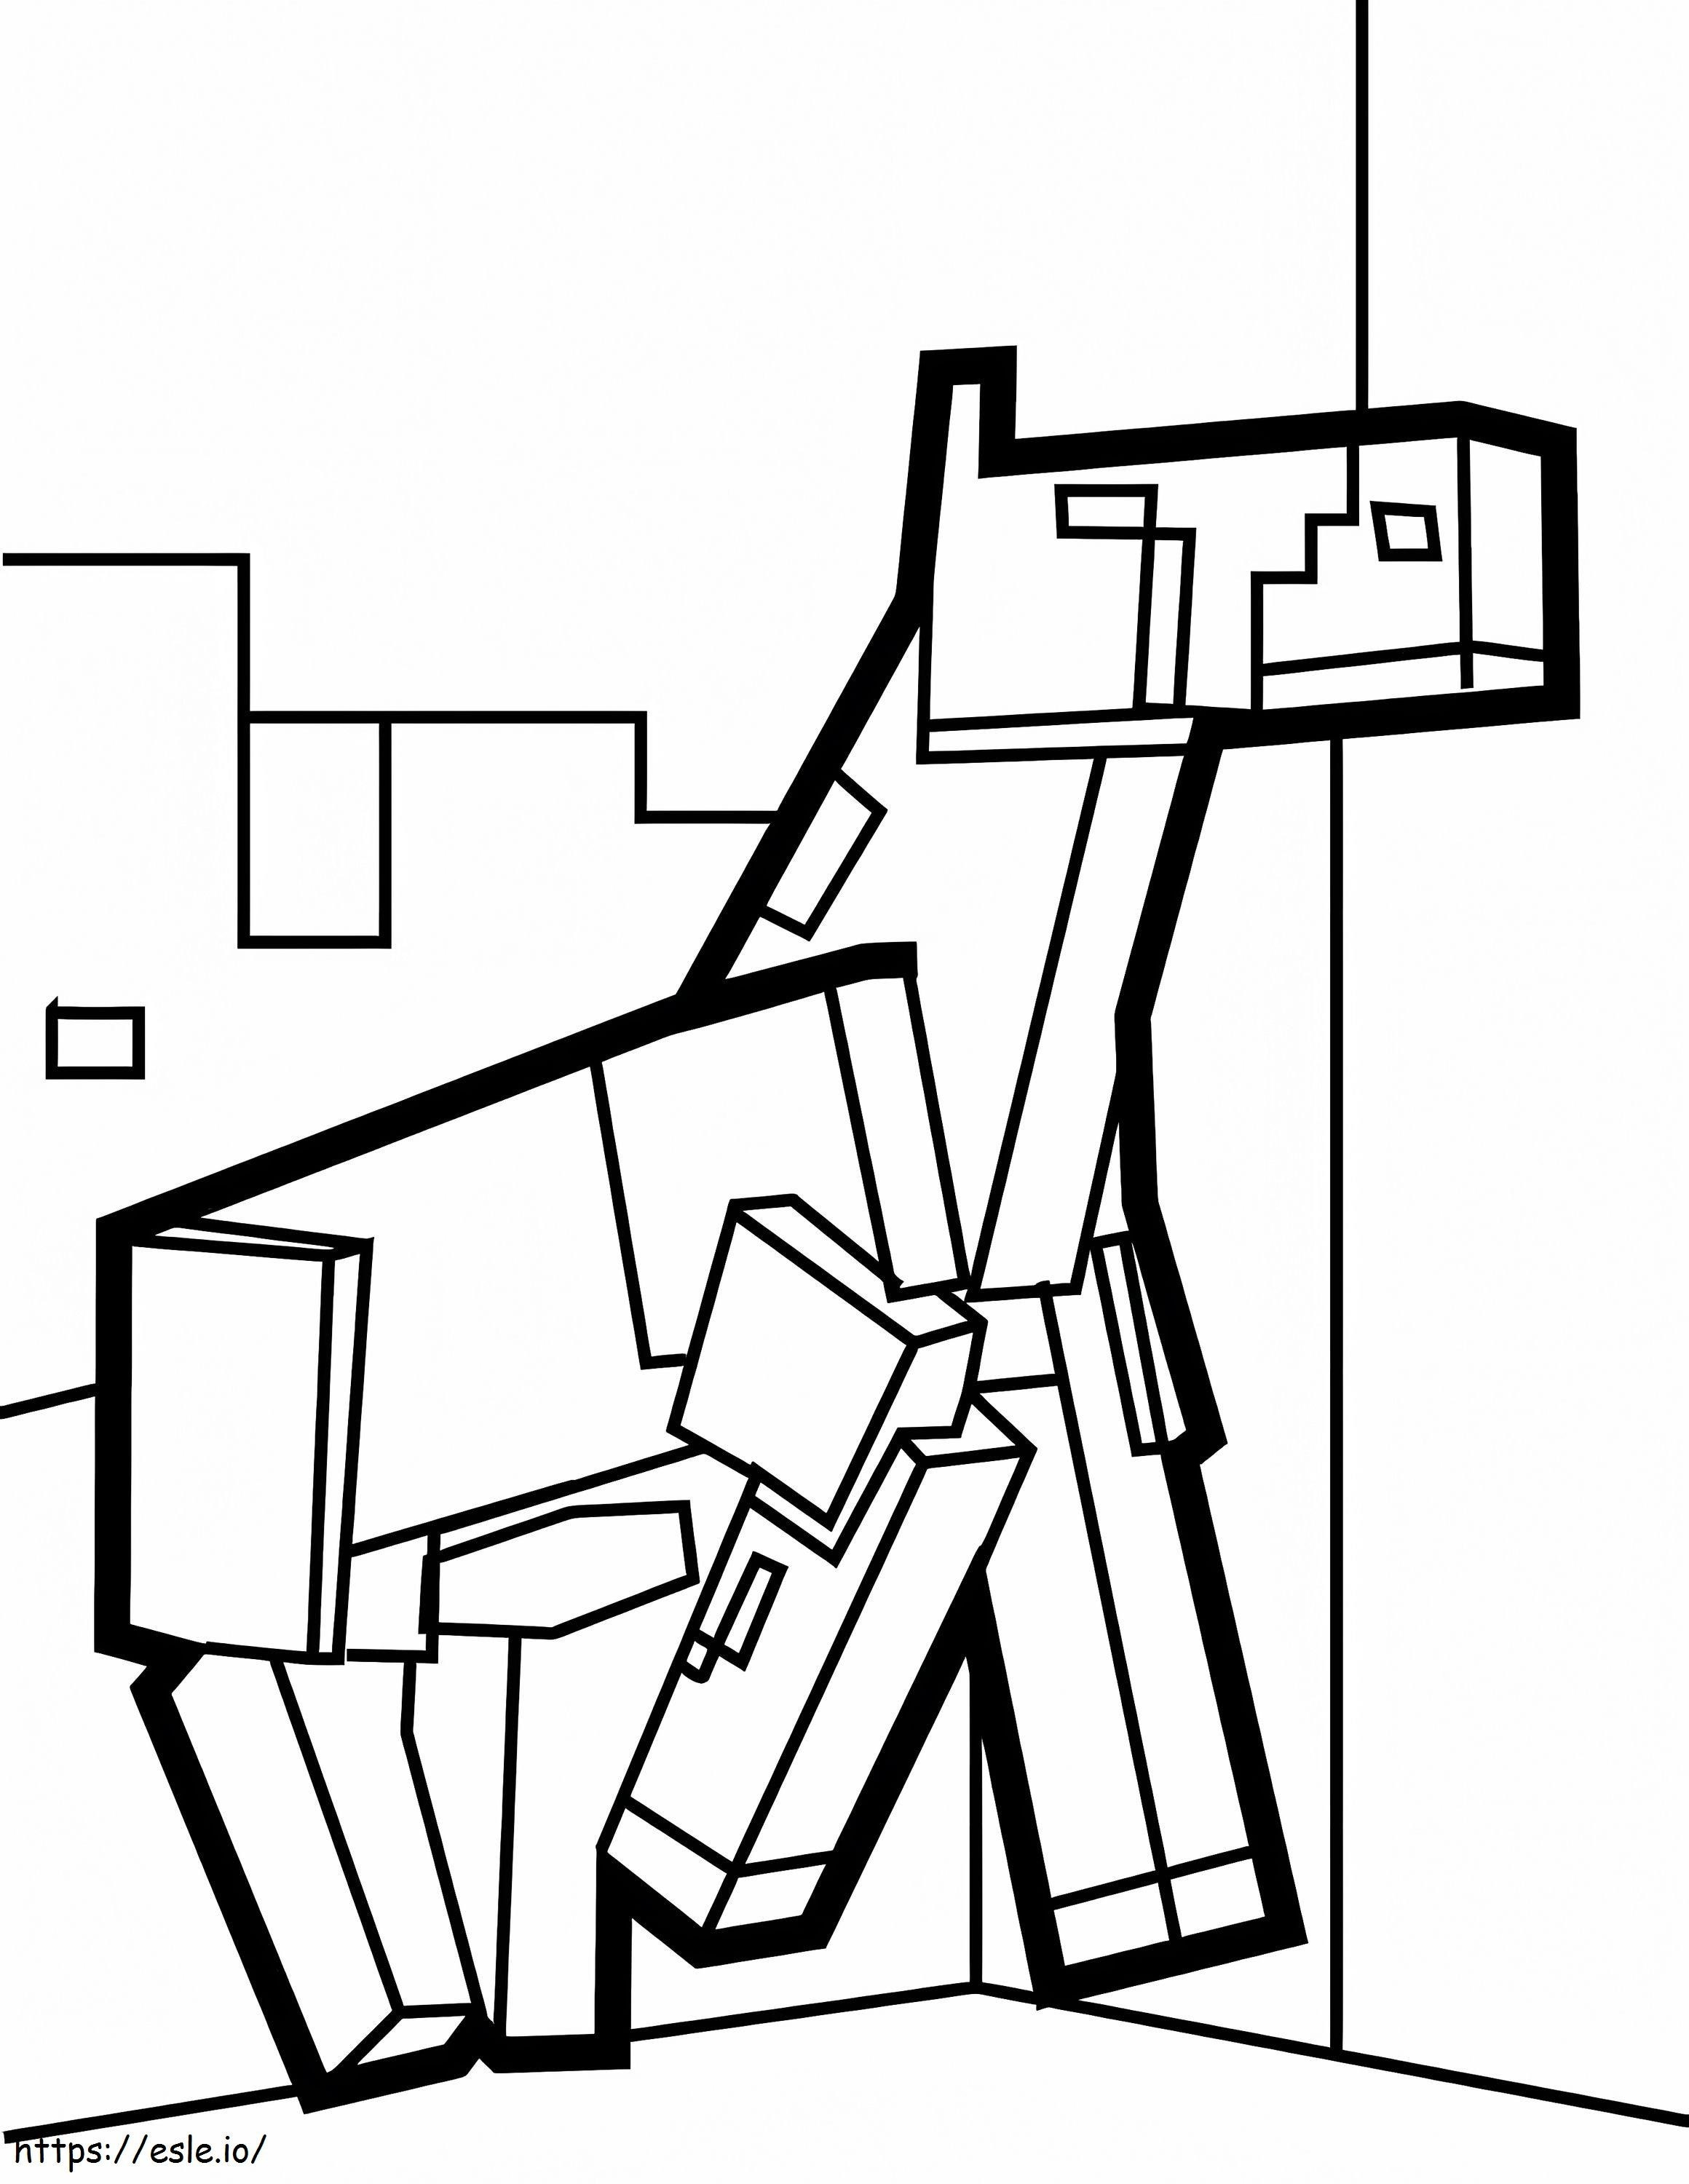 Horse In Minecraft coloring page